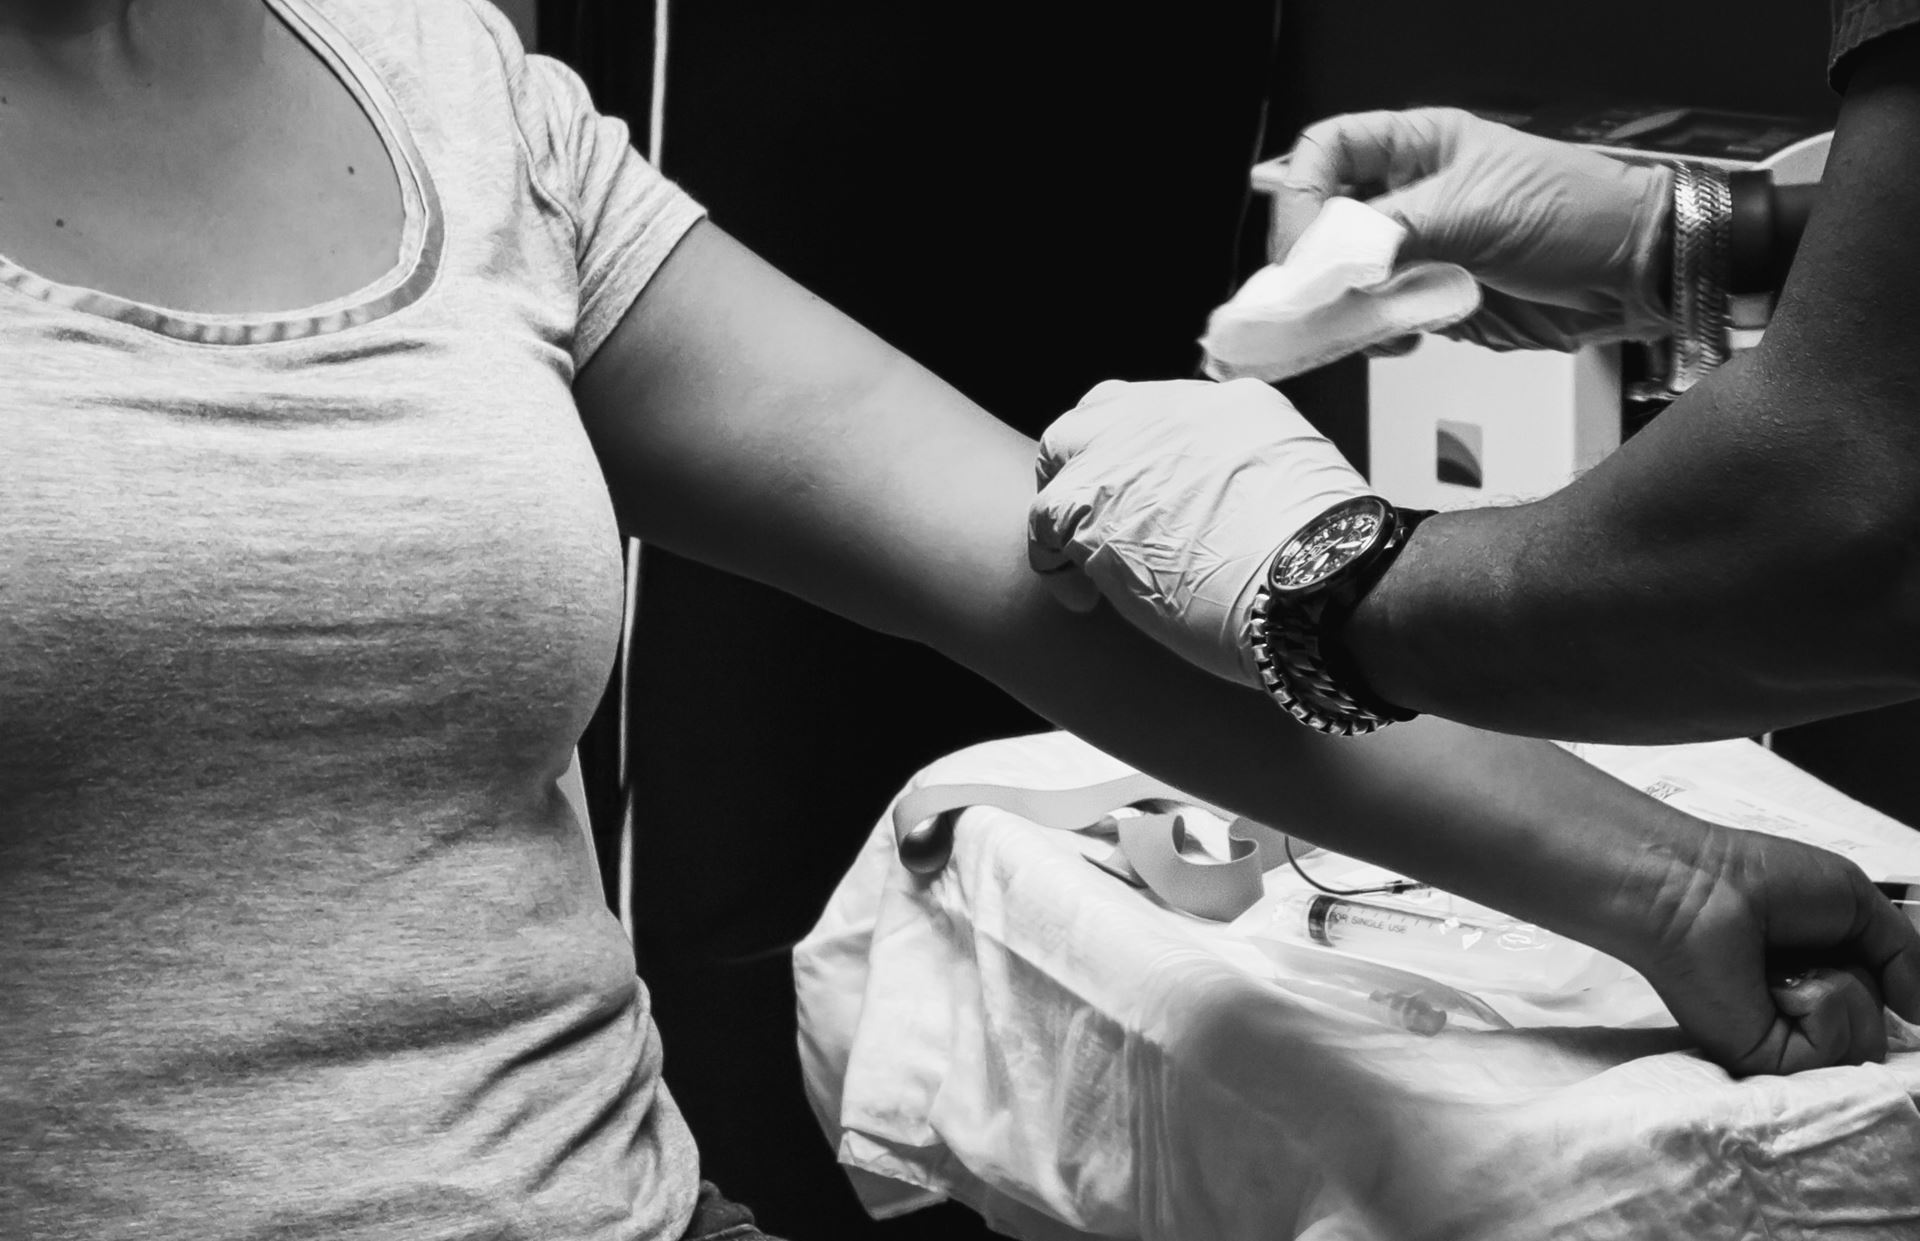 black and white image of someone having a blood test